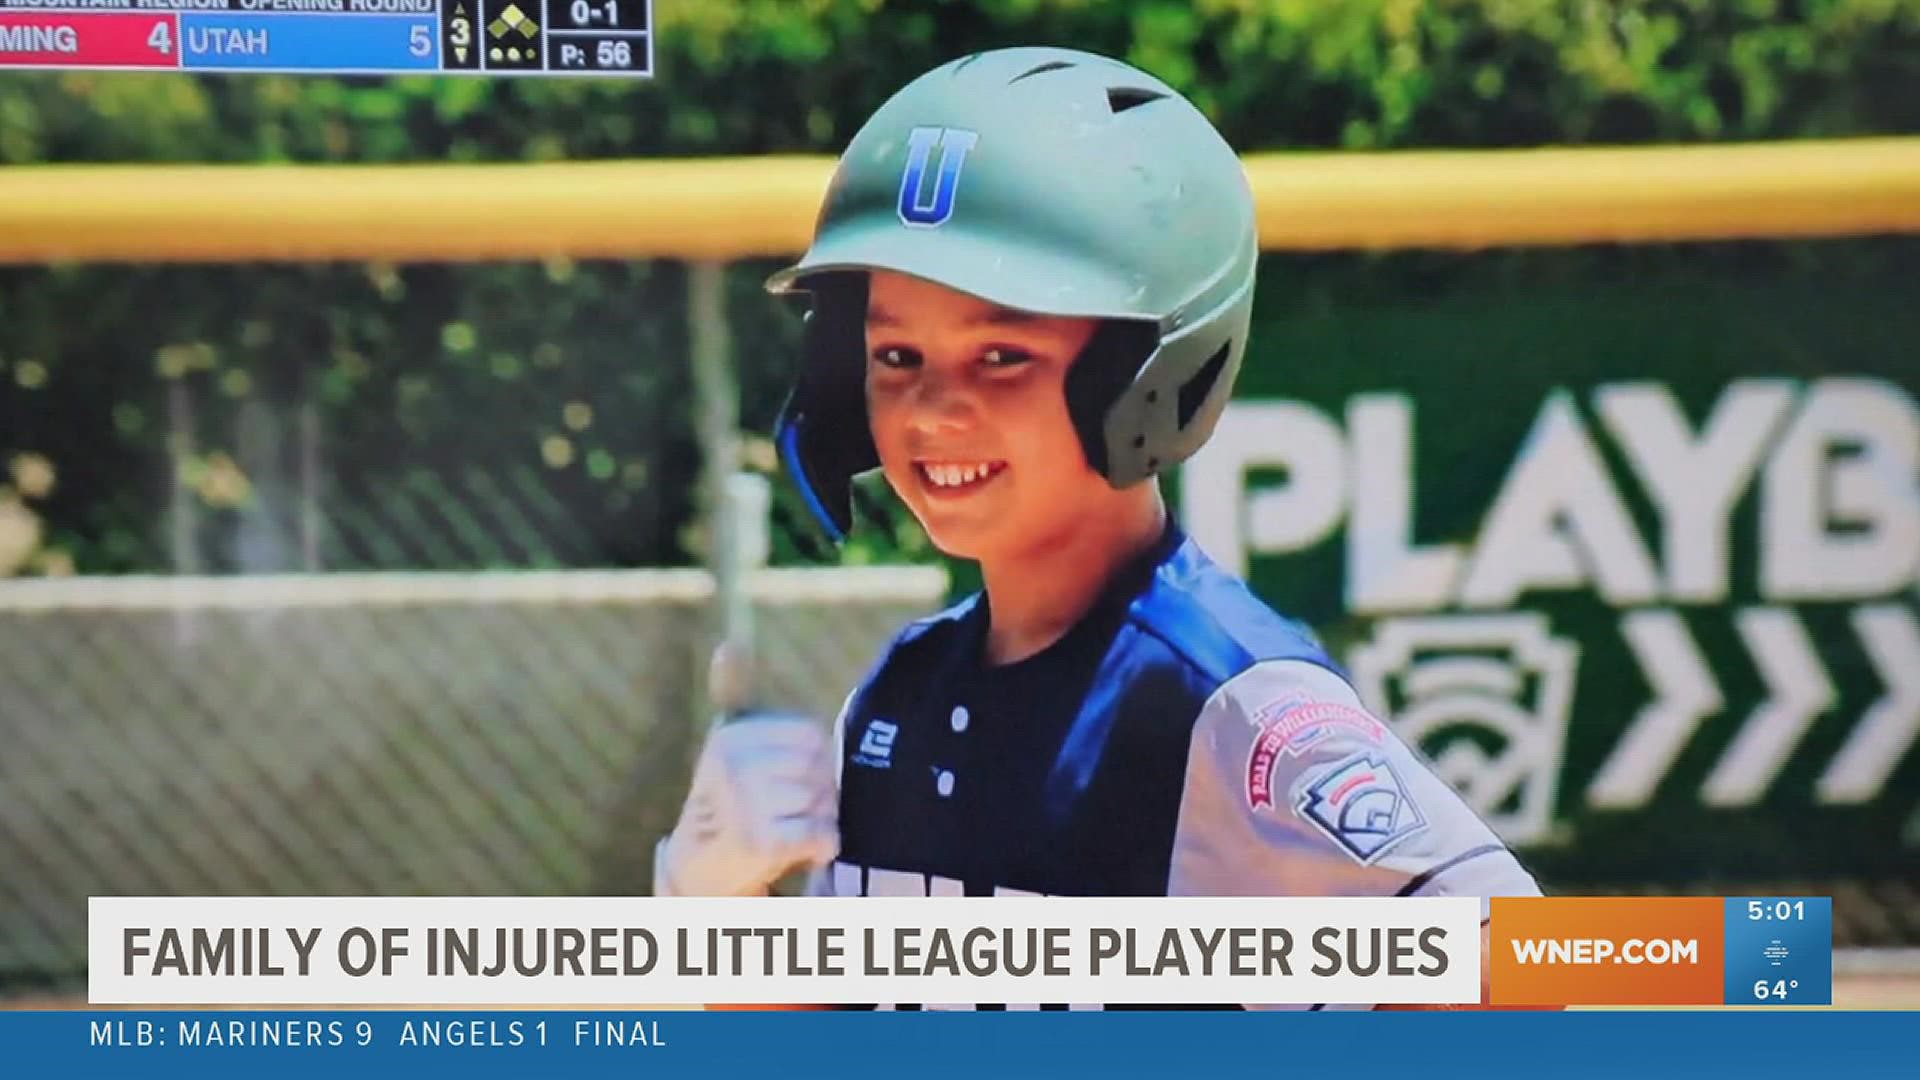 The family of the injured player from Utah is now suing Little League and a furniture maker in Lycoming County.